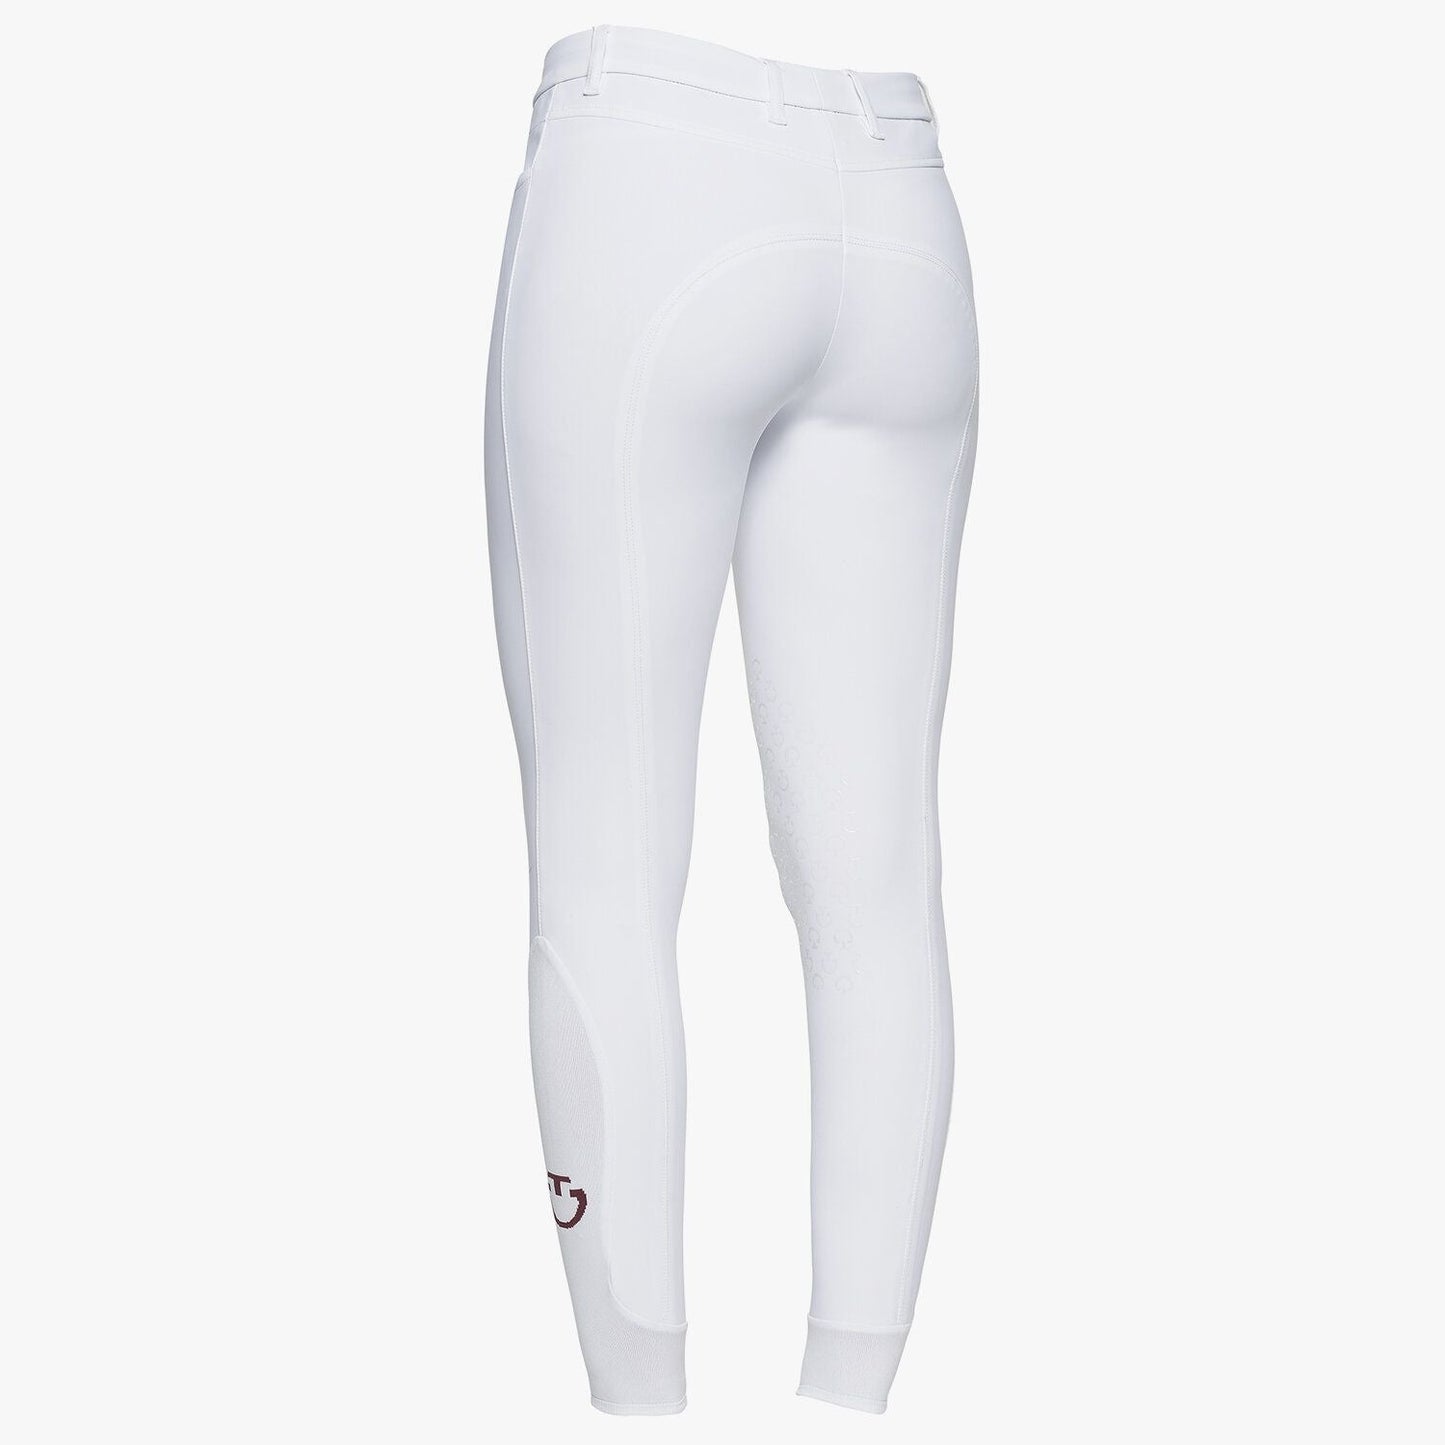 Cavalleria Toscana Ladies New Grip System Breeches - White-Trailrace Equestrian Outfitters-The Equestrian